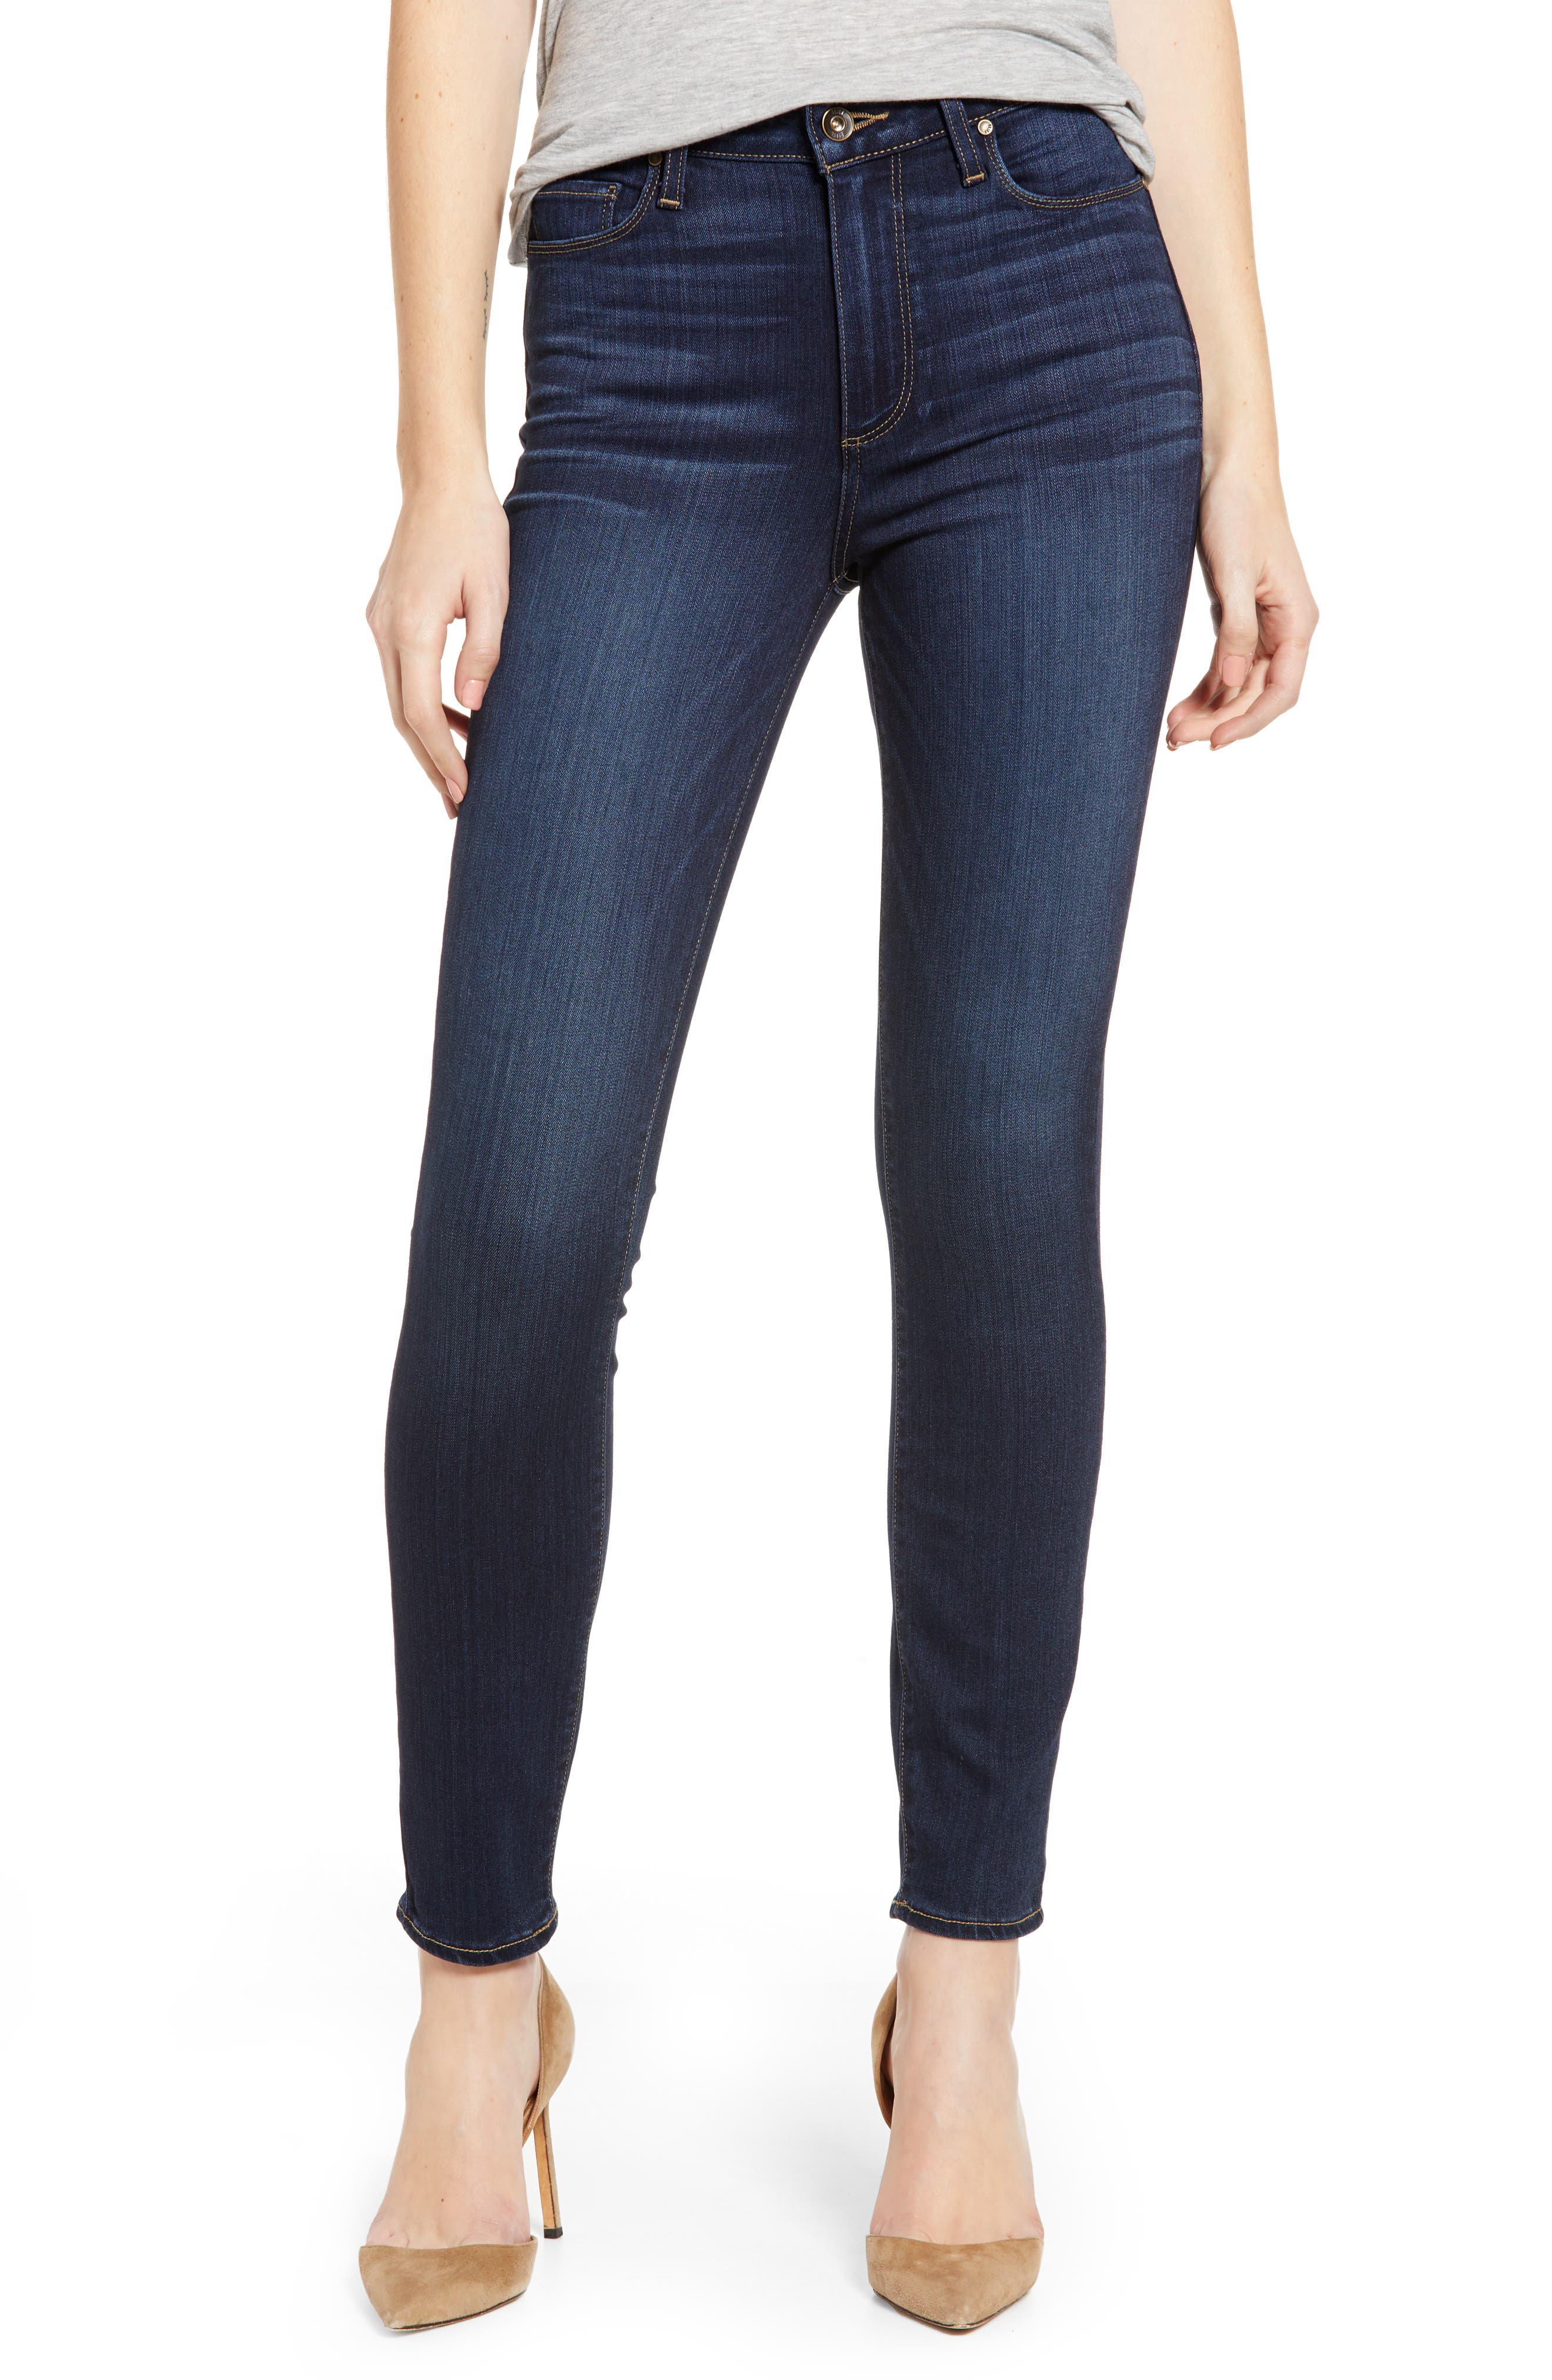 paige high rise jeans